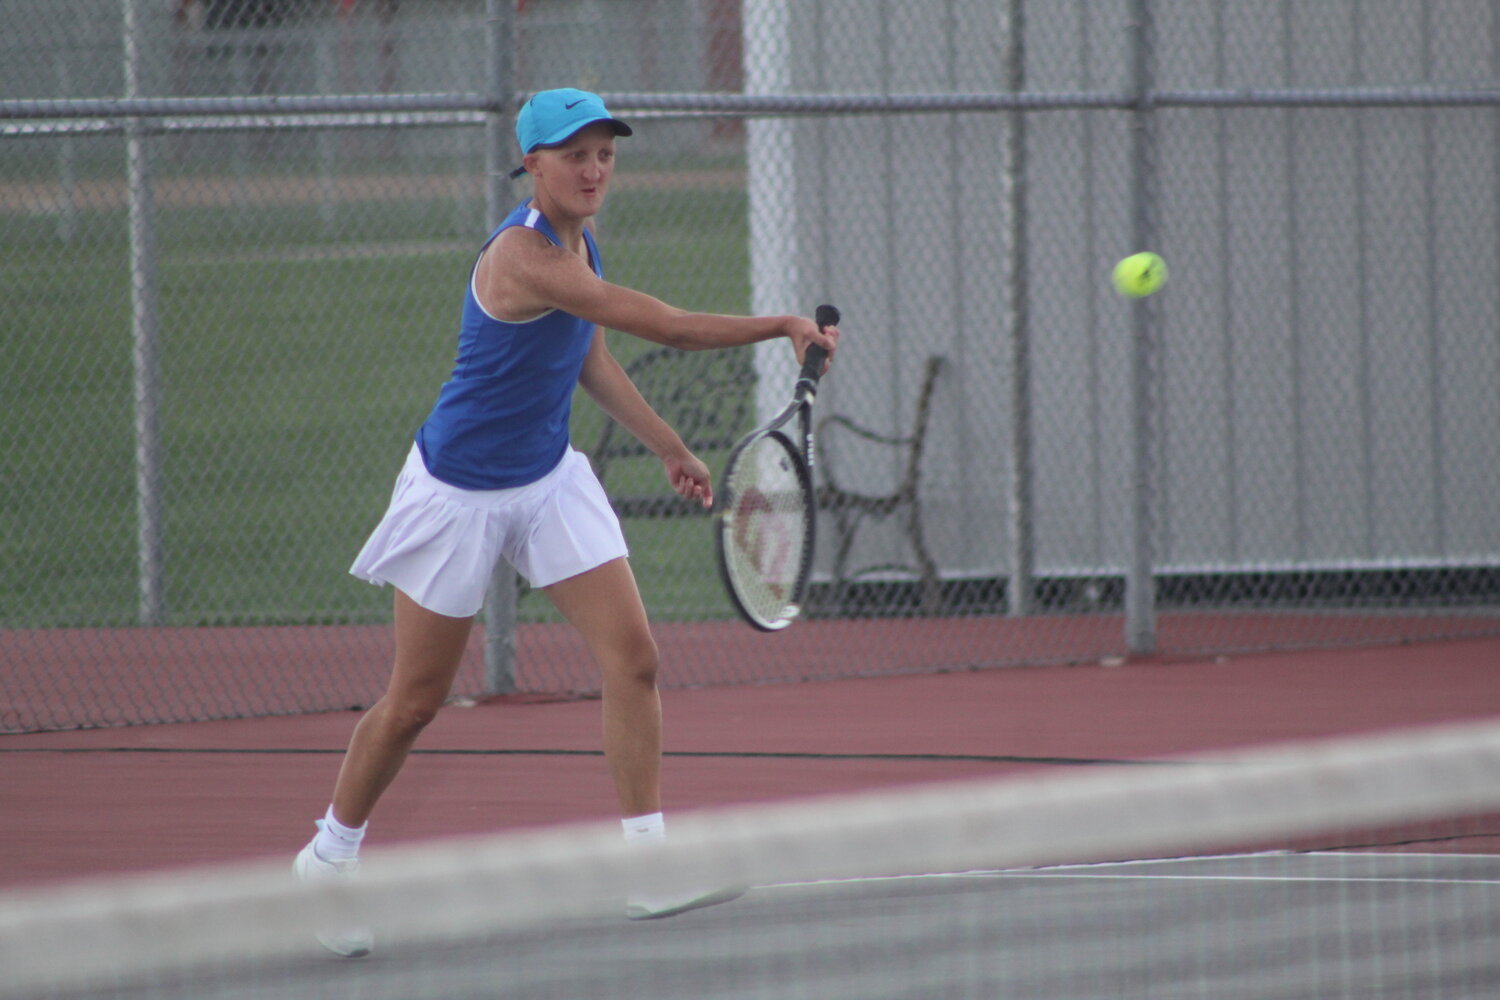 Reagan Cox was victorious in her match at two singles